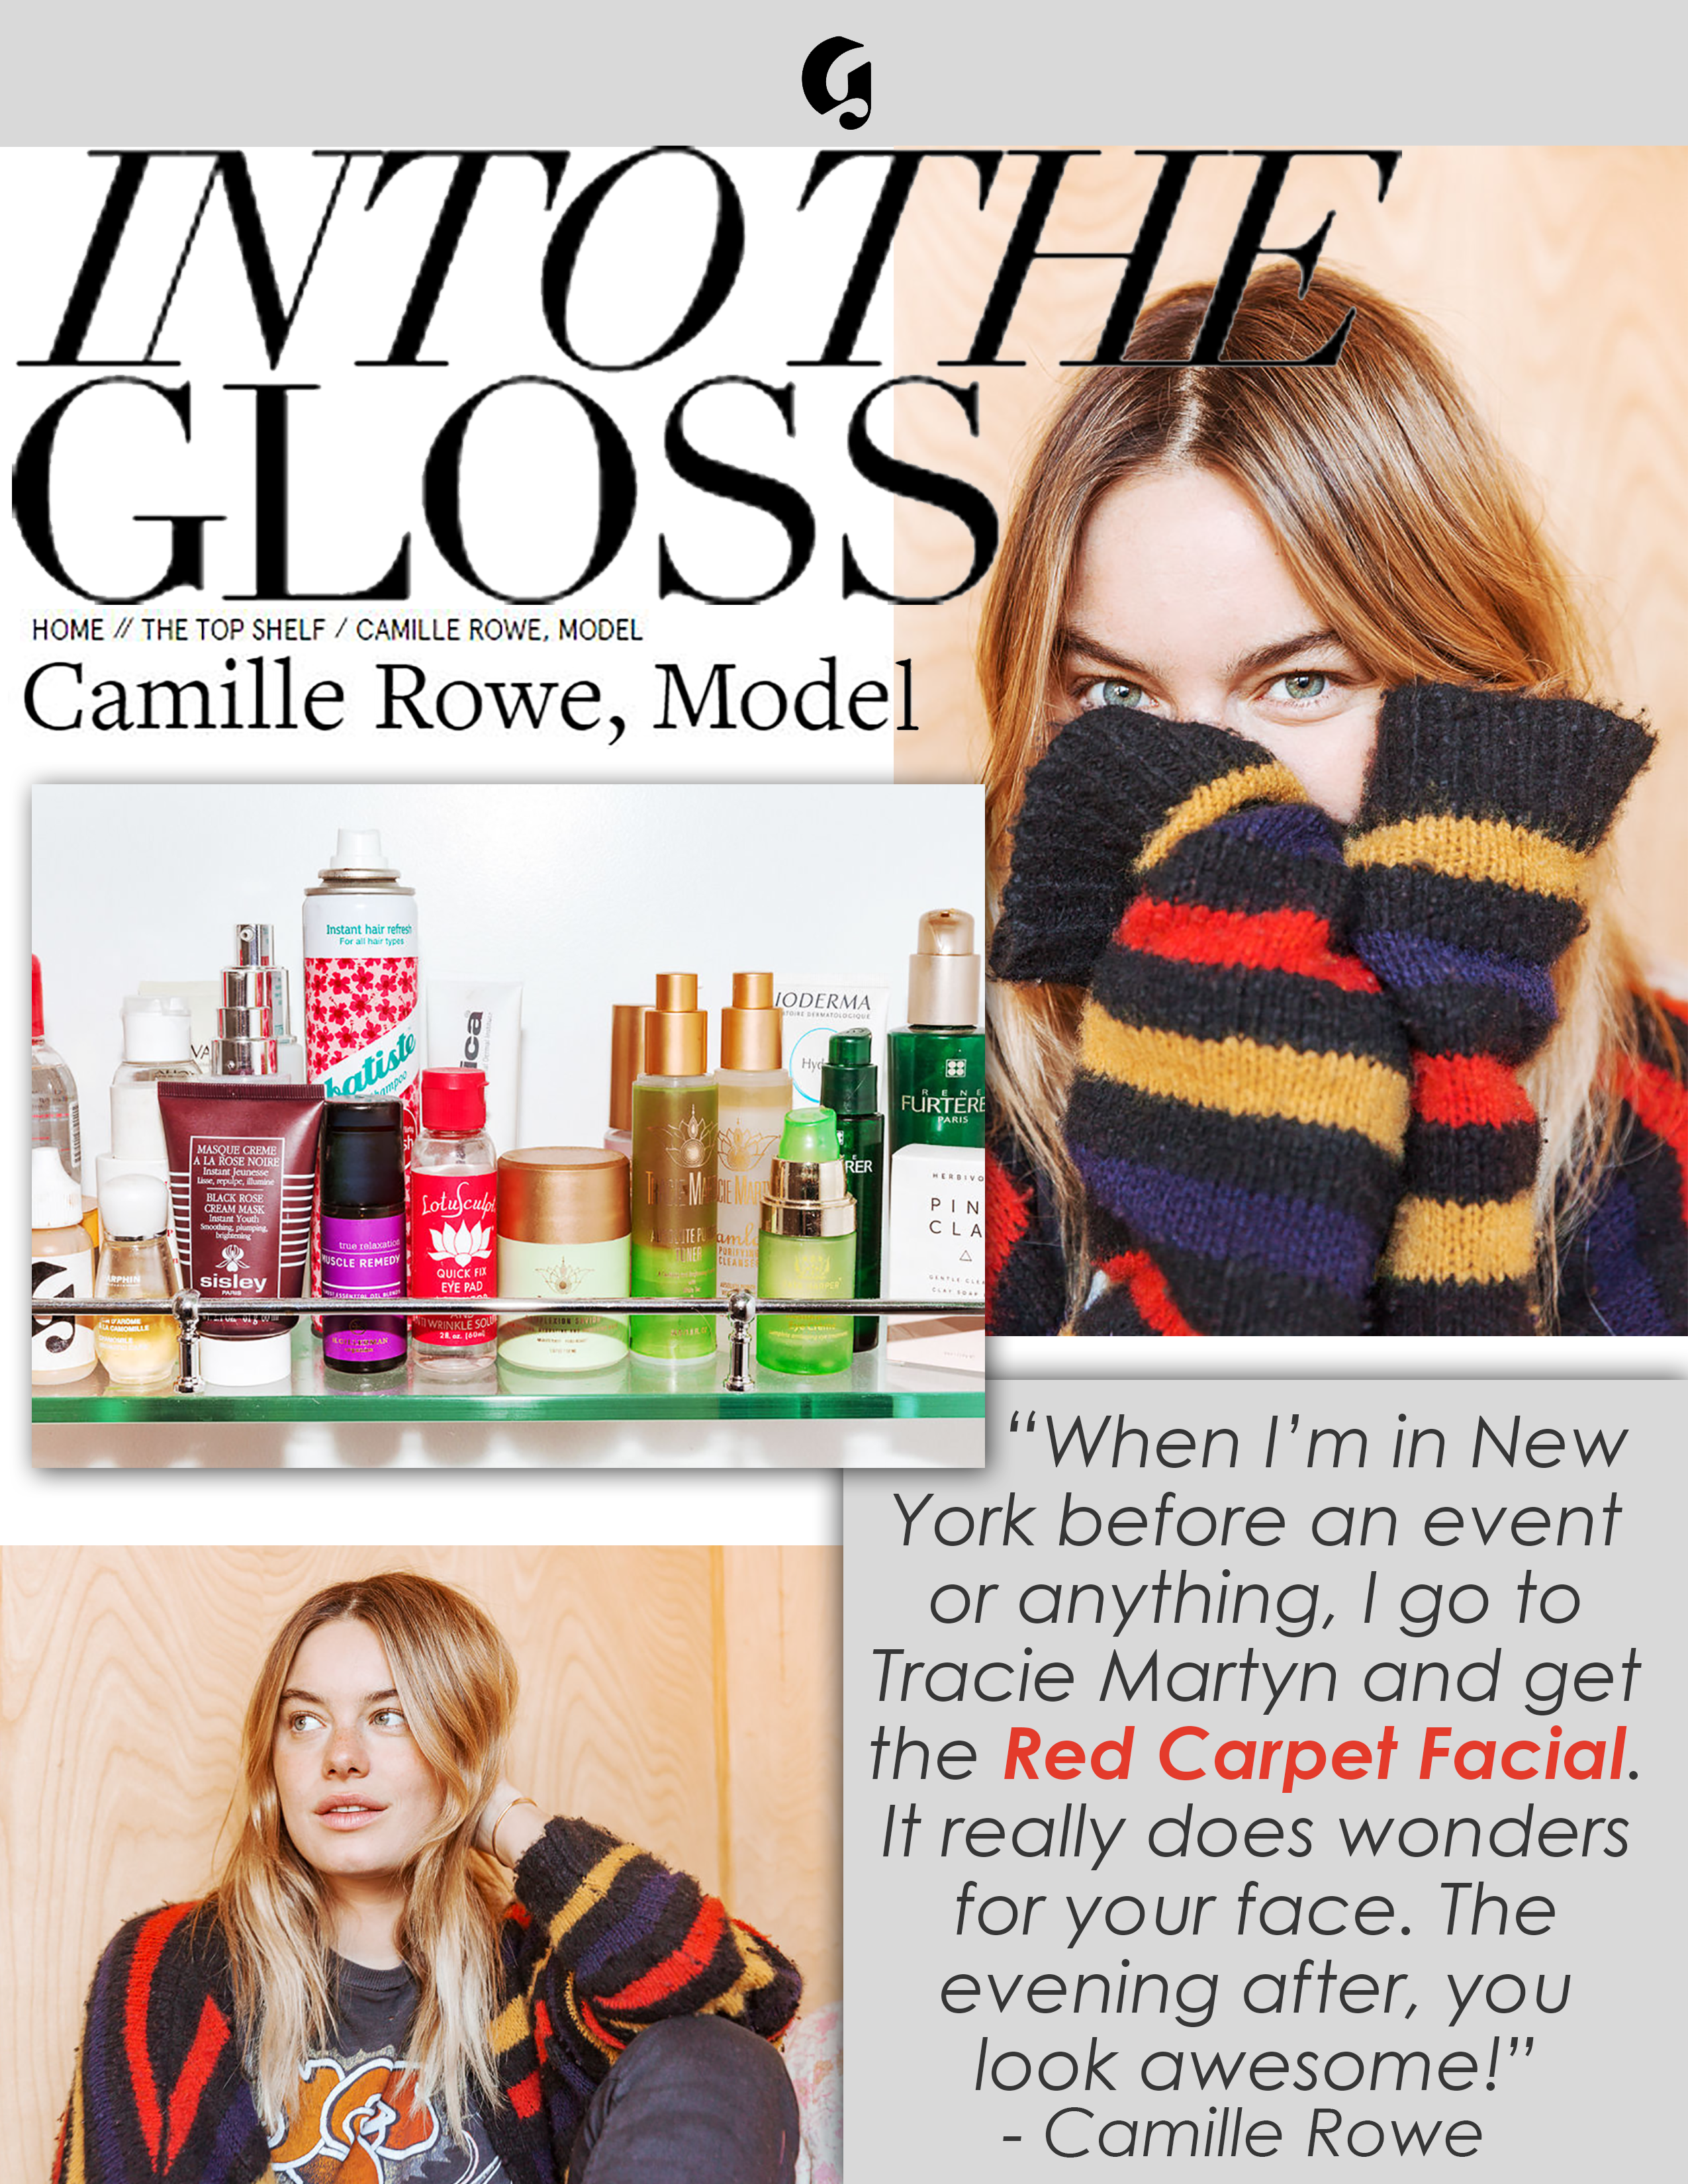 INTO THE GLOSS CAMILLE ROWE